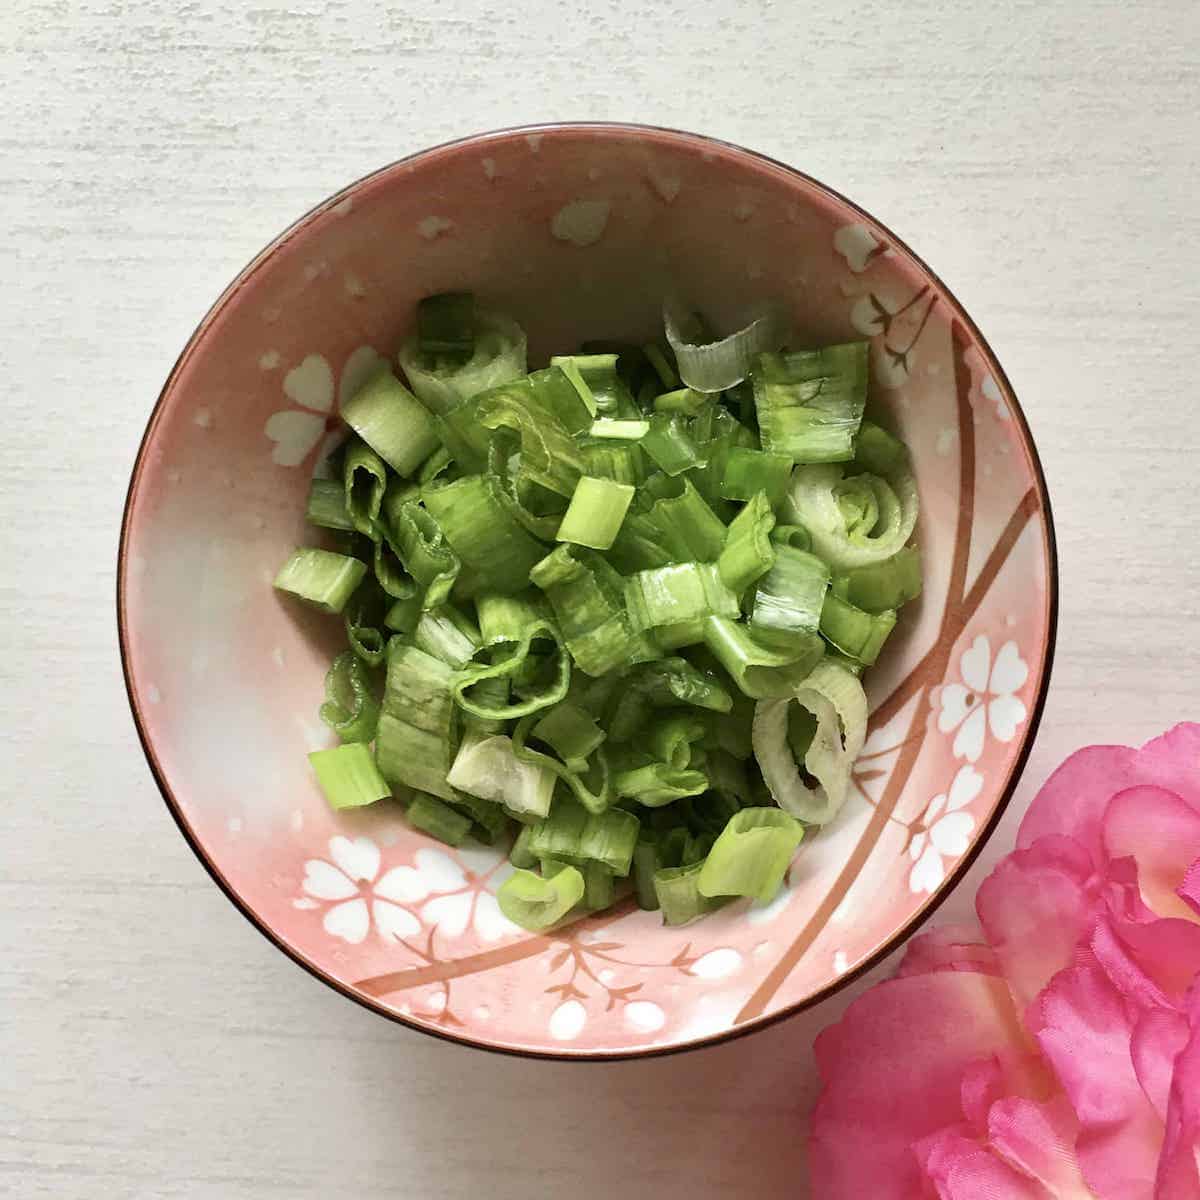 A bowl of sliced spring onions, top green part only.